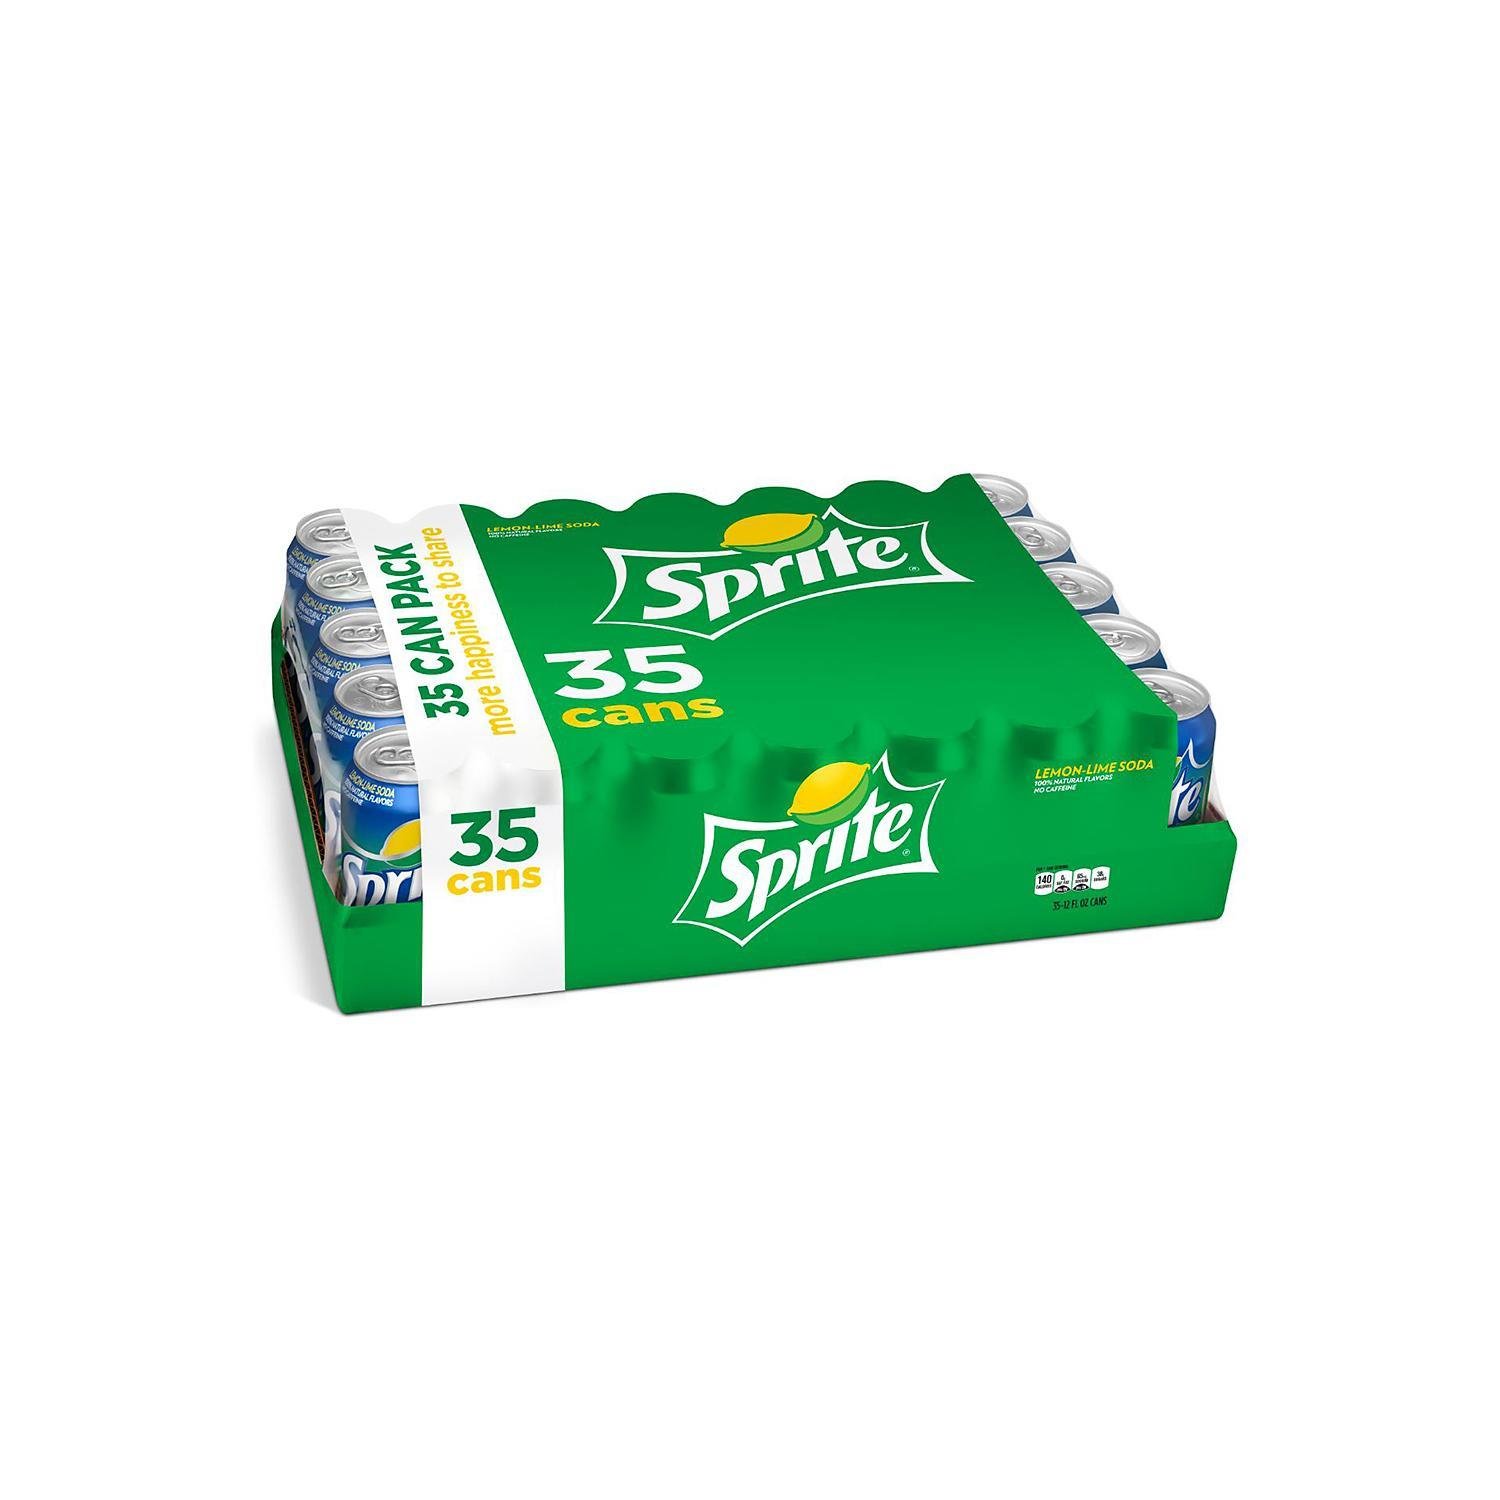 SPRITE (12 oz. cans, 24 pk.) - ICC Business Products